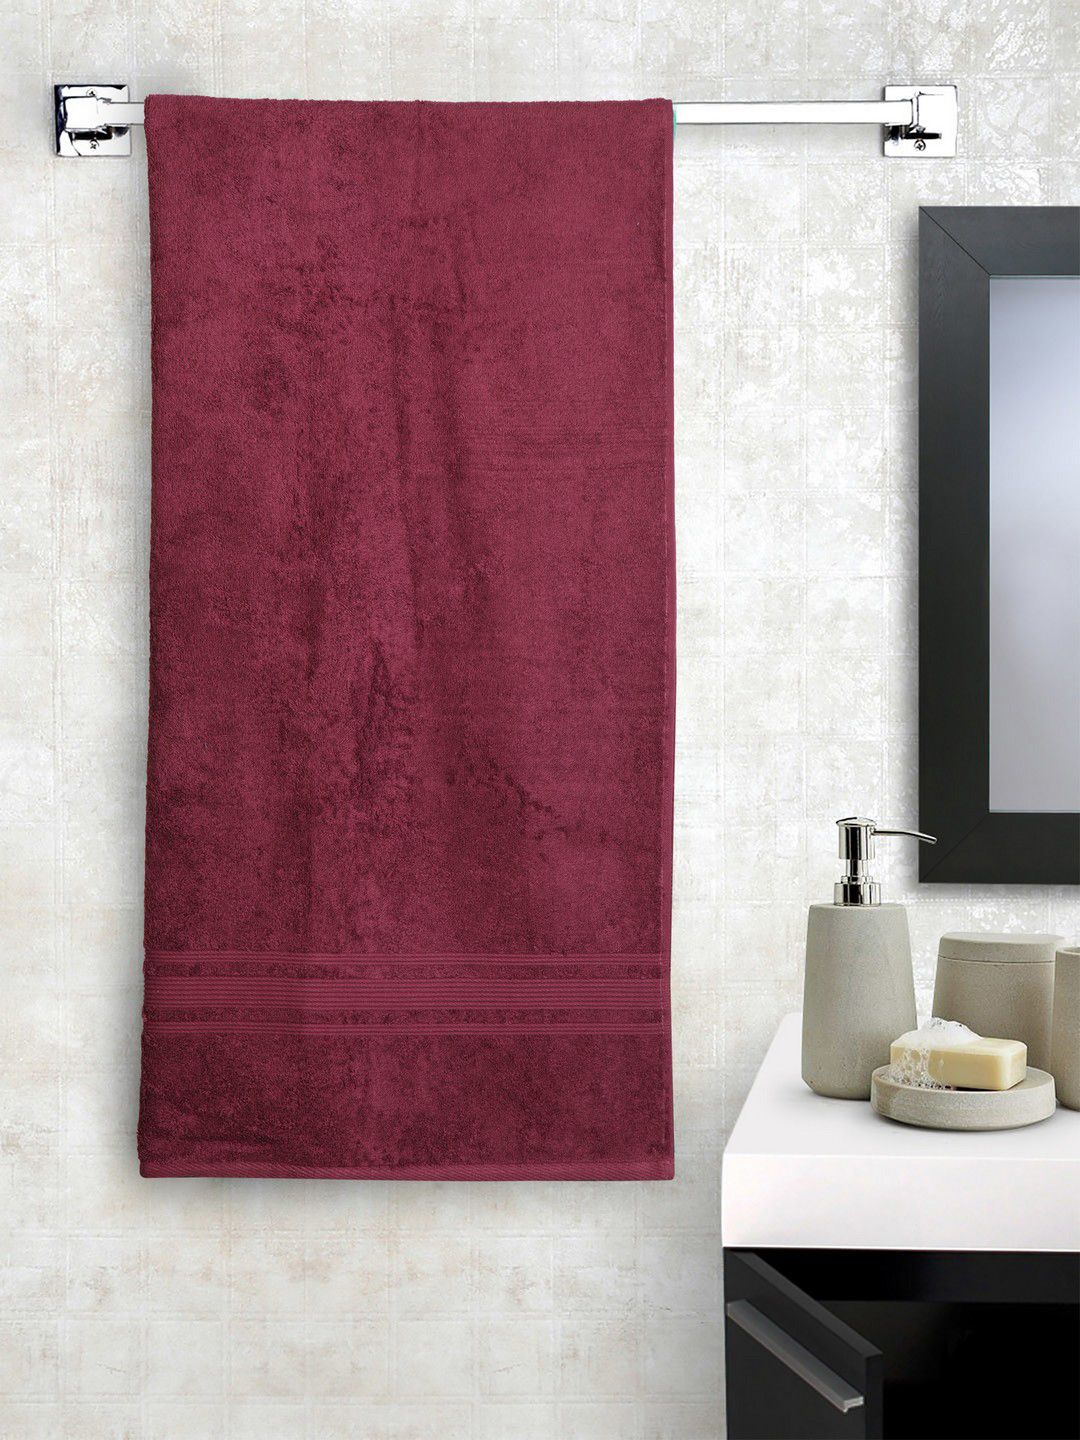 Lushomes Burgundy Solid Cotton Bath Towel 450 GSM Price in India